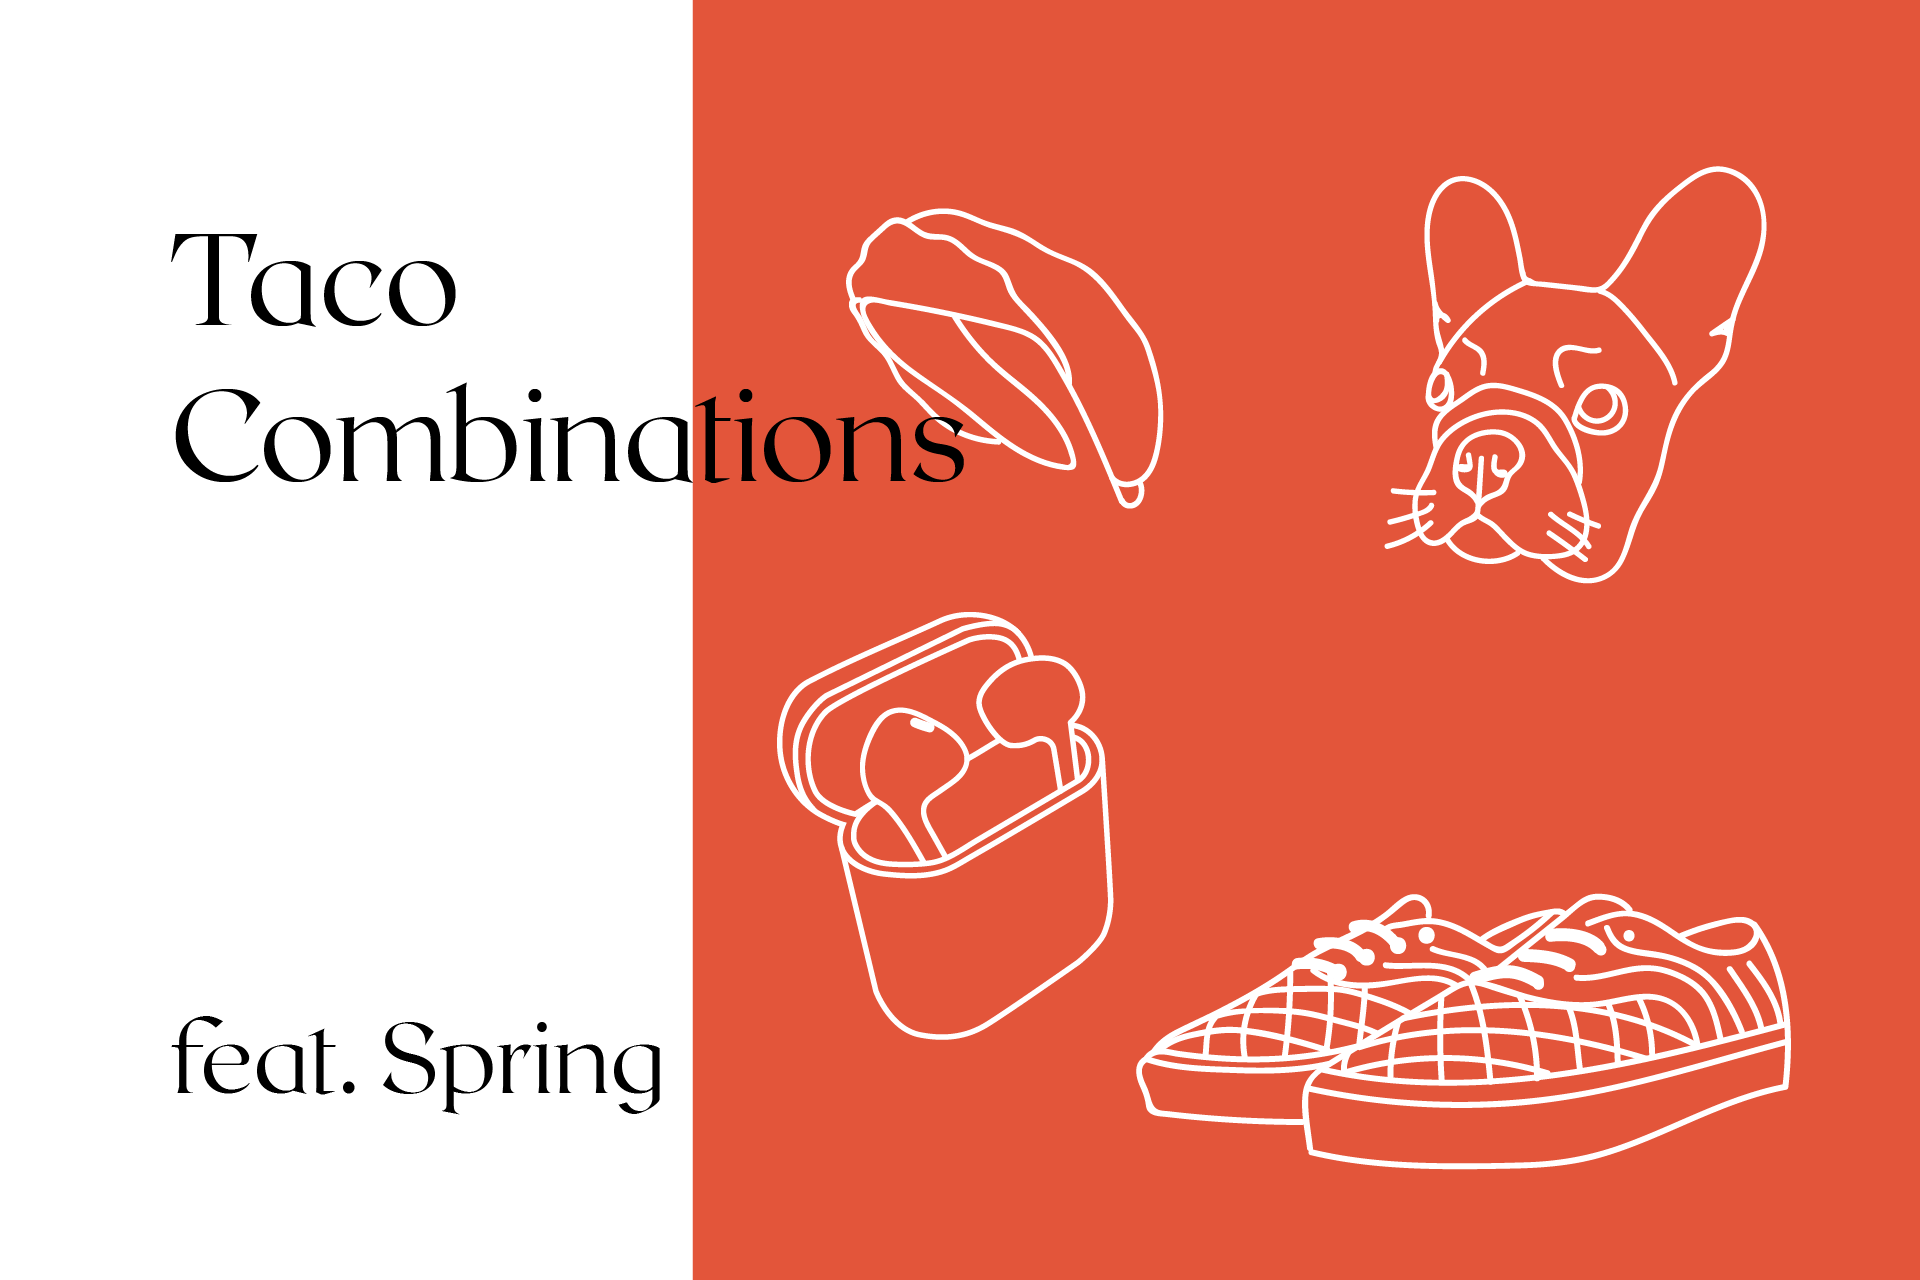 Taco Combinations feat. Spring